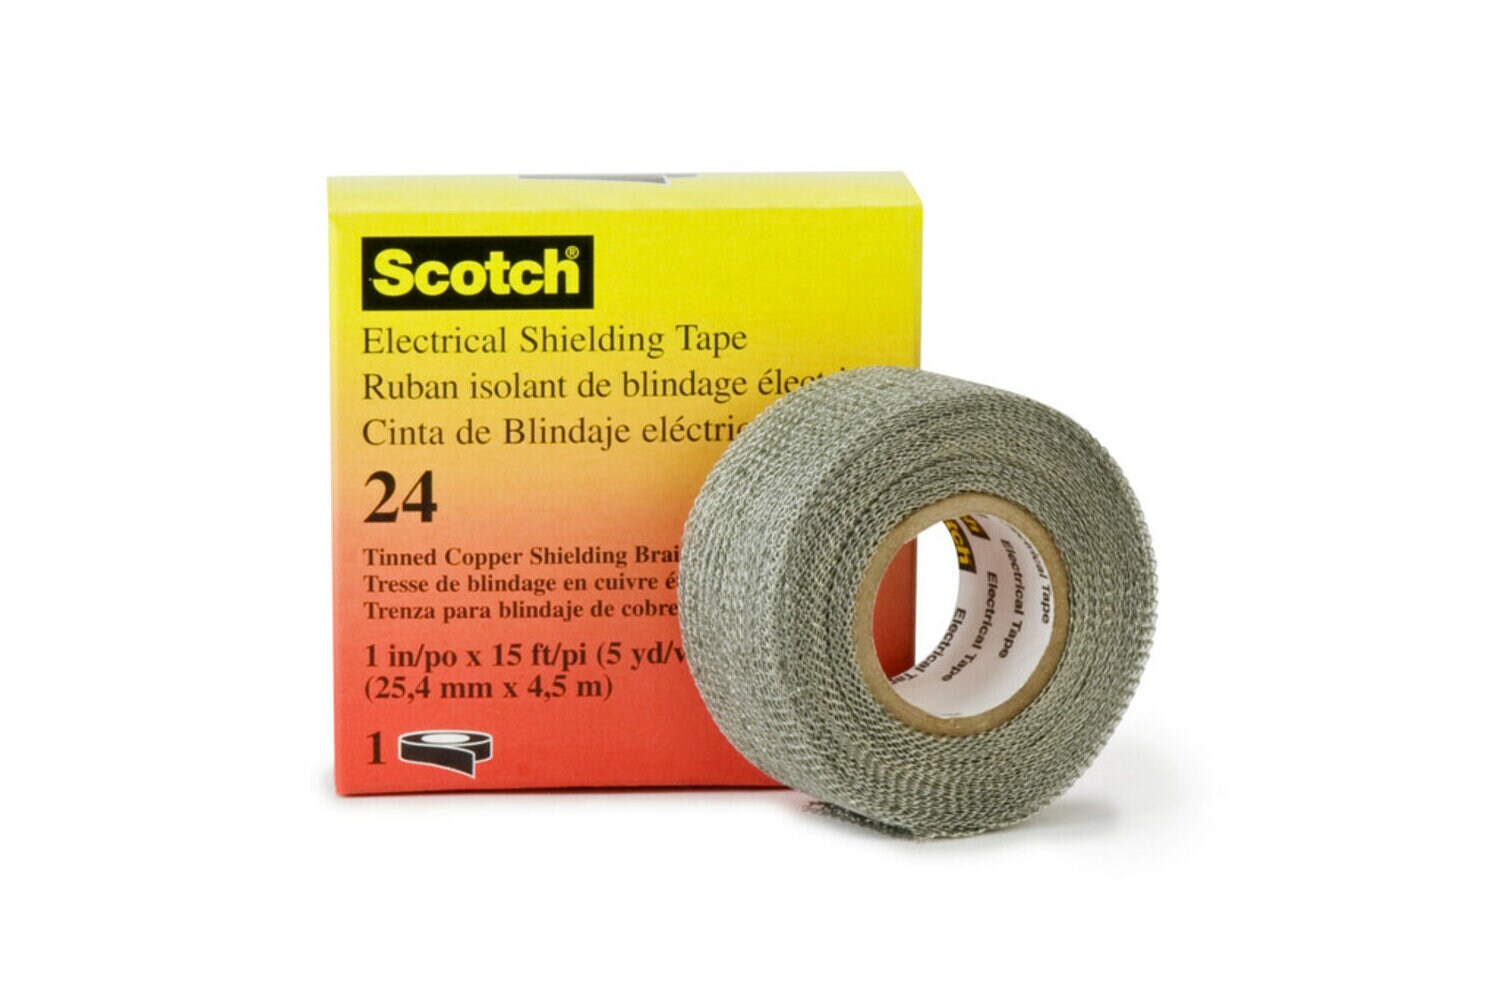 Scotch Gift Wrap Tape Rolls, 0.75 X 300 Inches, 3 Ea 